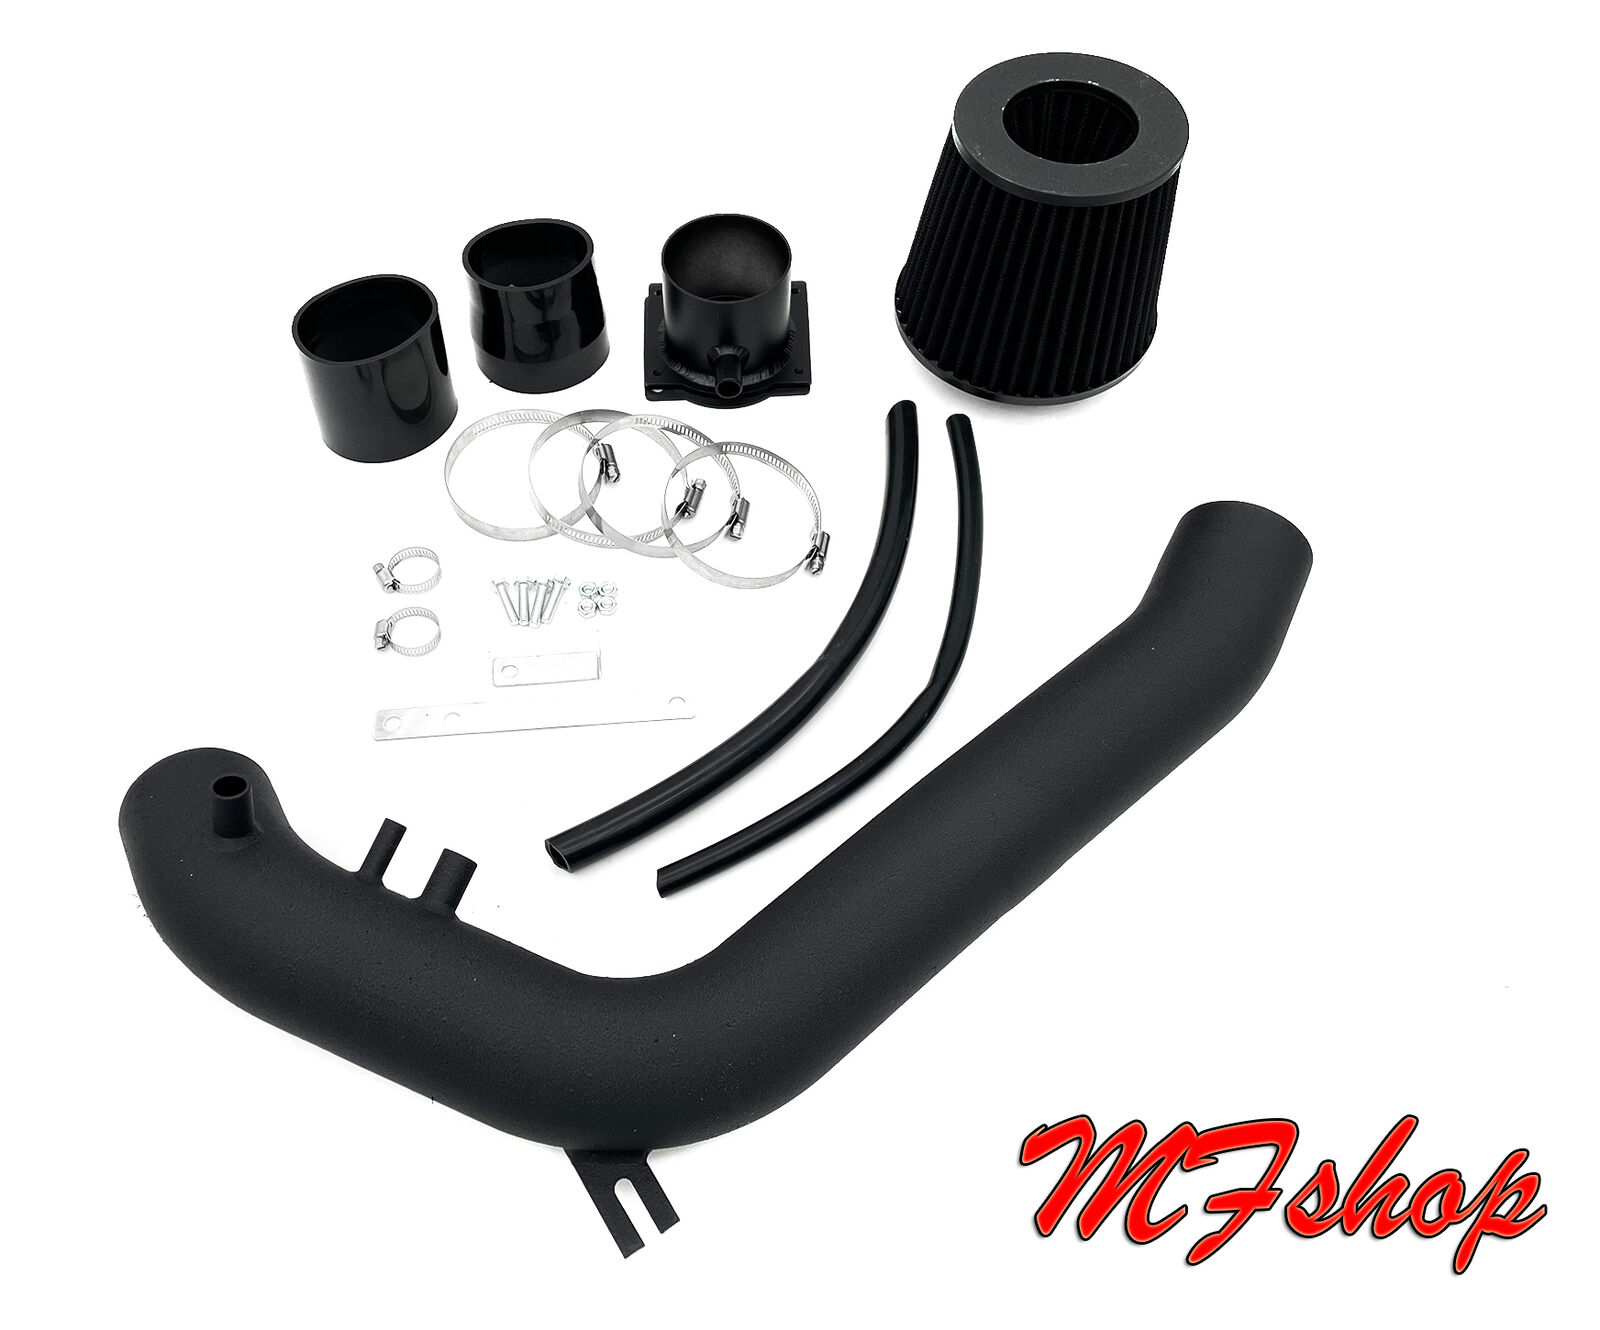 Coated Black For 1991-1994 Nissan 240SX S13 Silvia 2.4L L4 Air Intake System Kit